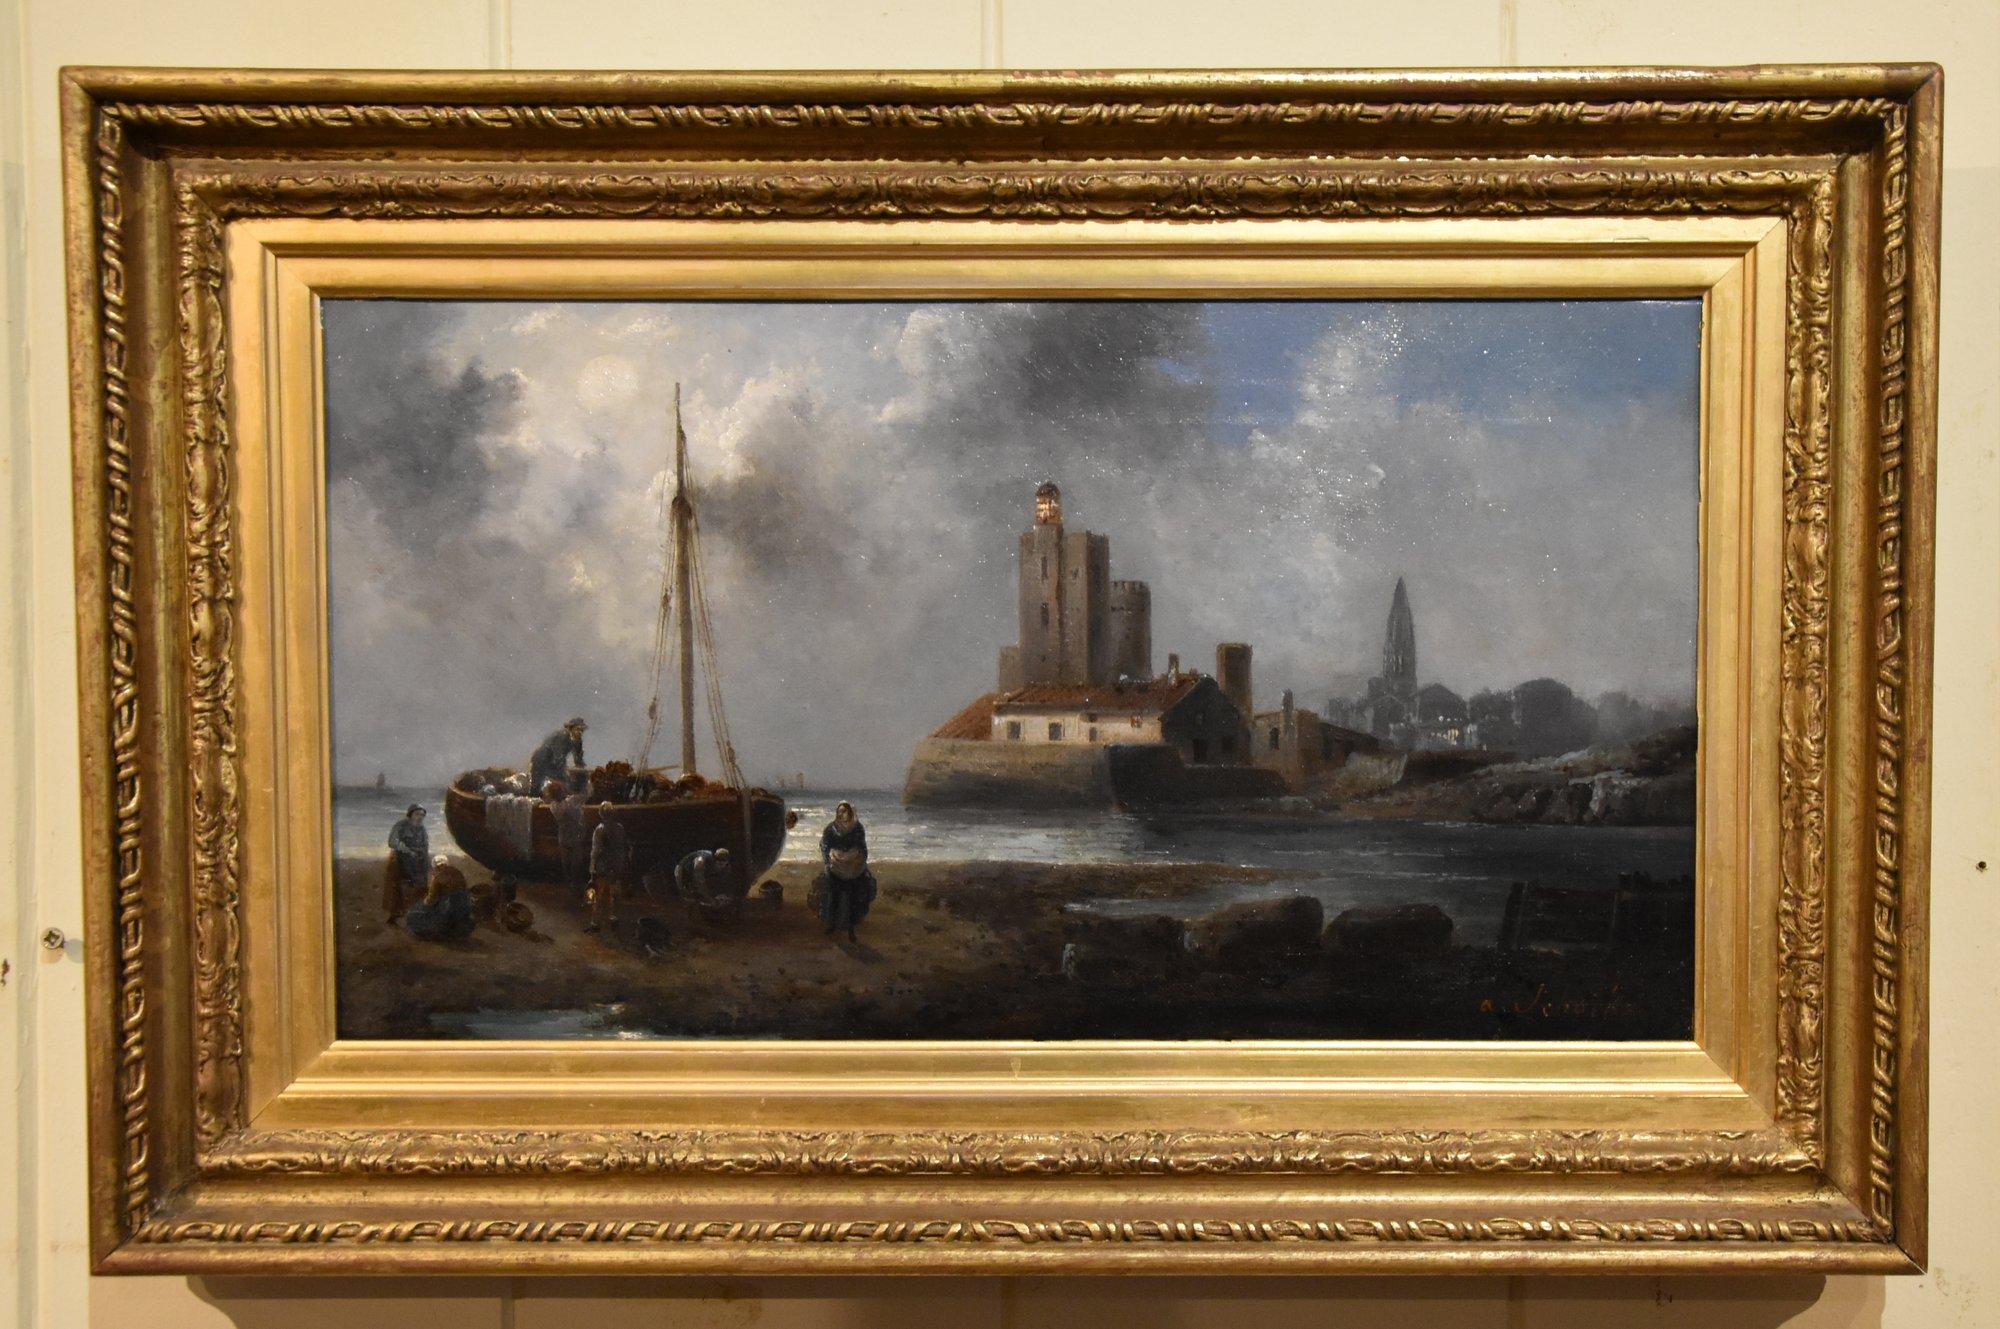 Oil Painting by Anton Schoth "Evening Unloading the Catch"  1859 - 1906 Austrian Painter of Coastal scenes in the Mediterranean and off the Dutch of French coast. Oil on canvas. Signed 

Dimensions unframed 10 x 18 inches
Dimensions framed 15 x 23